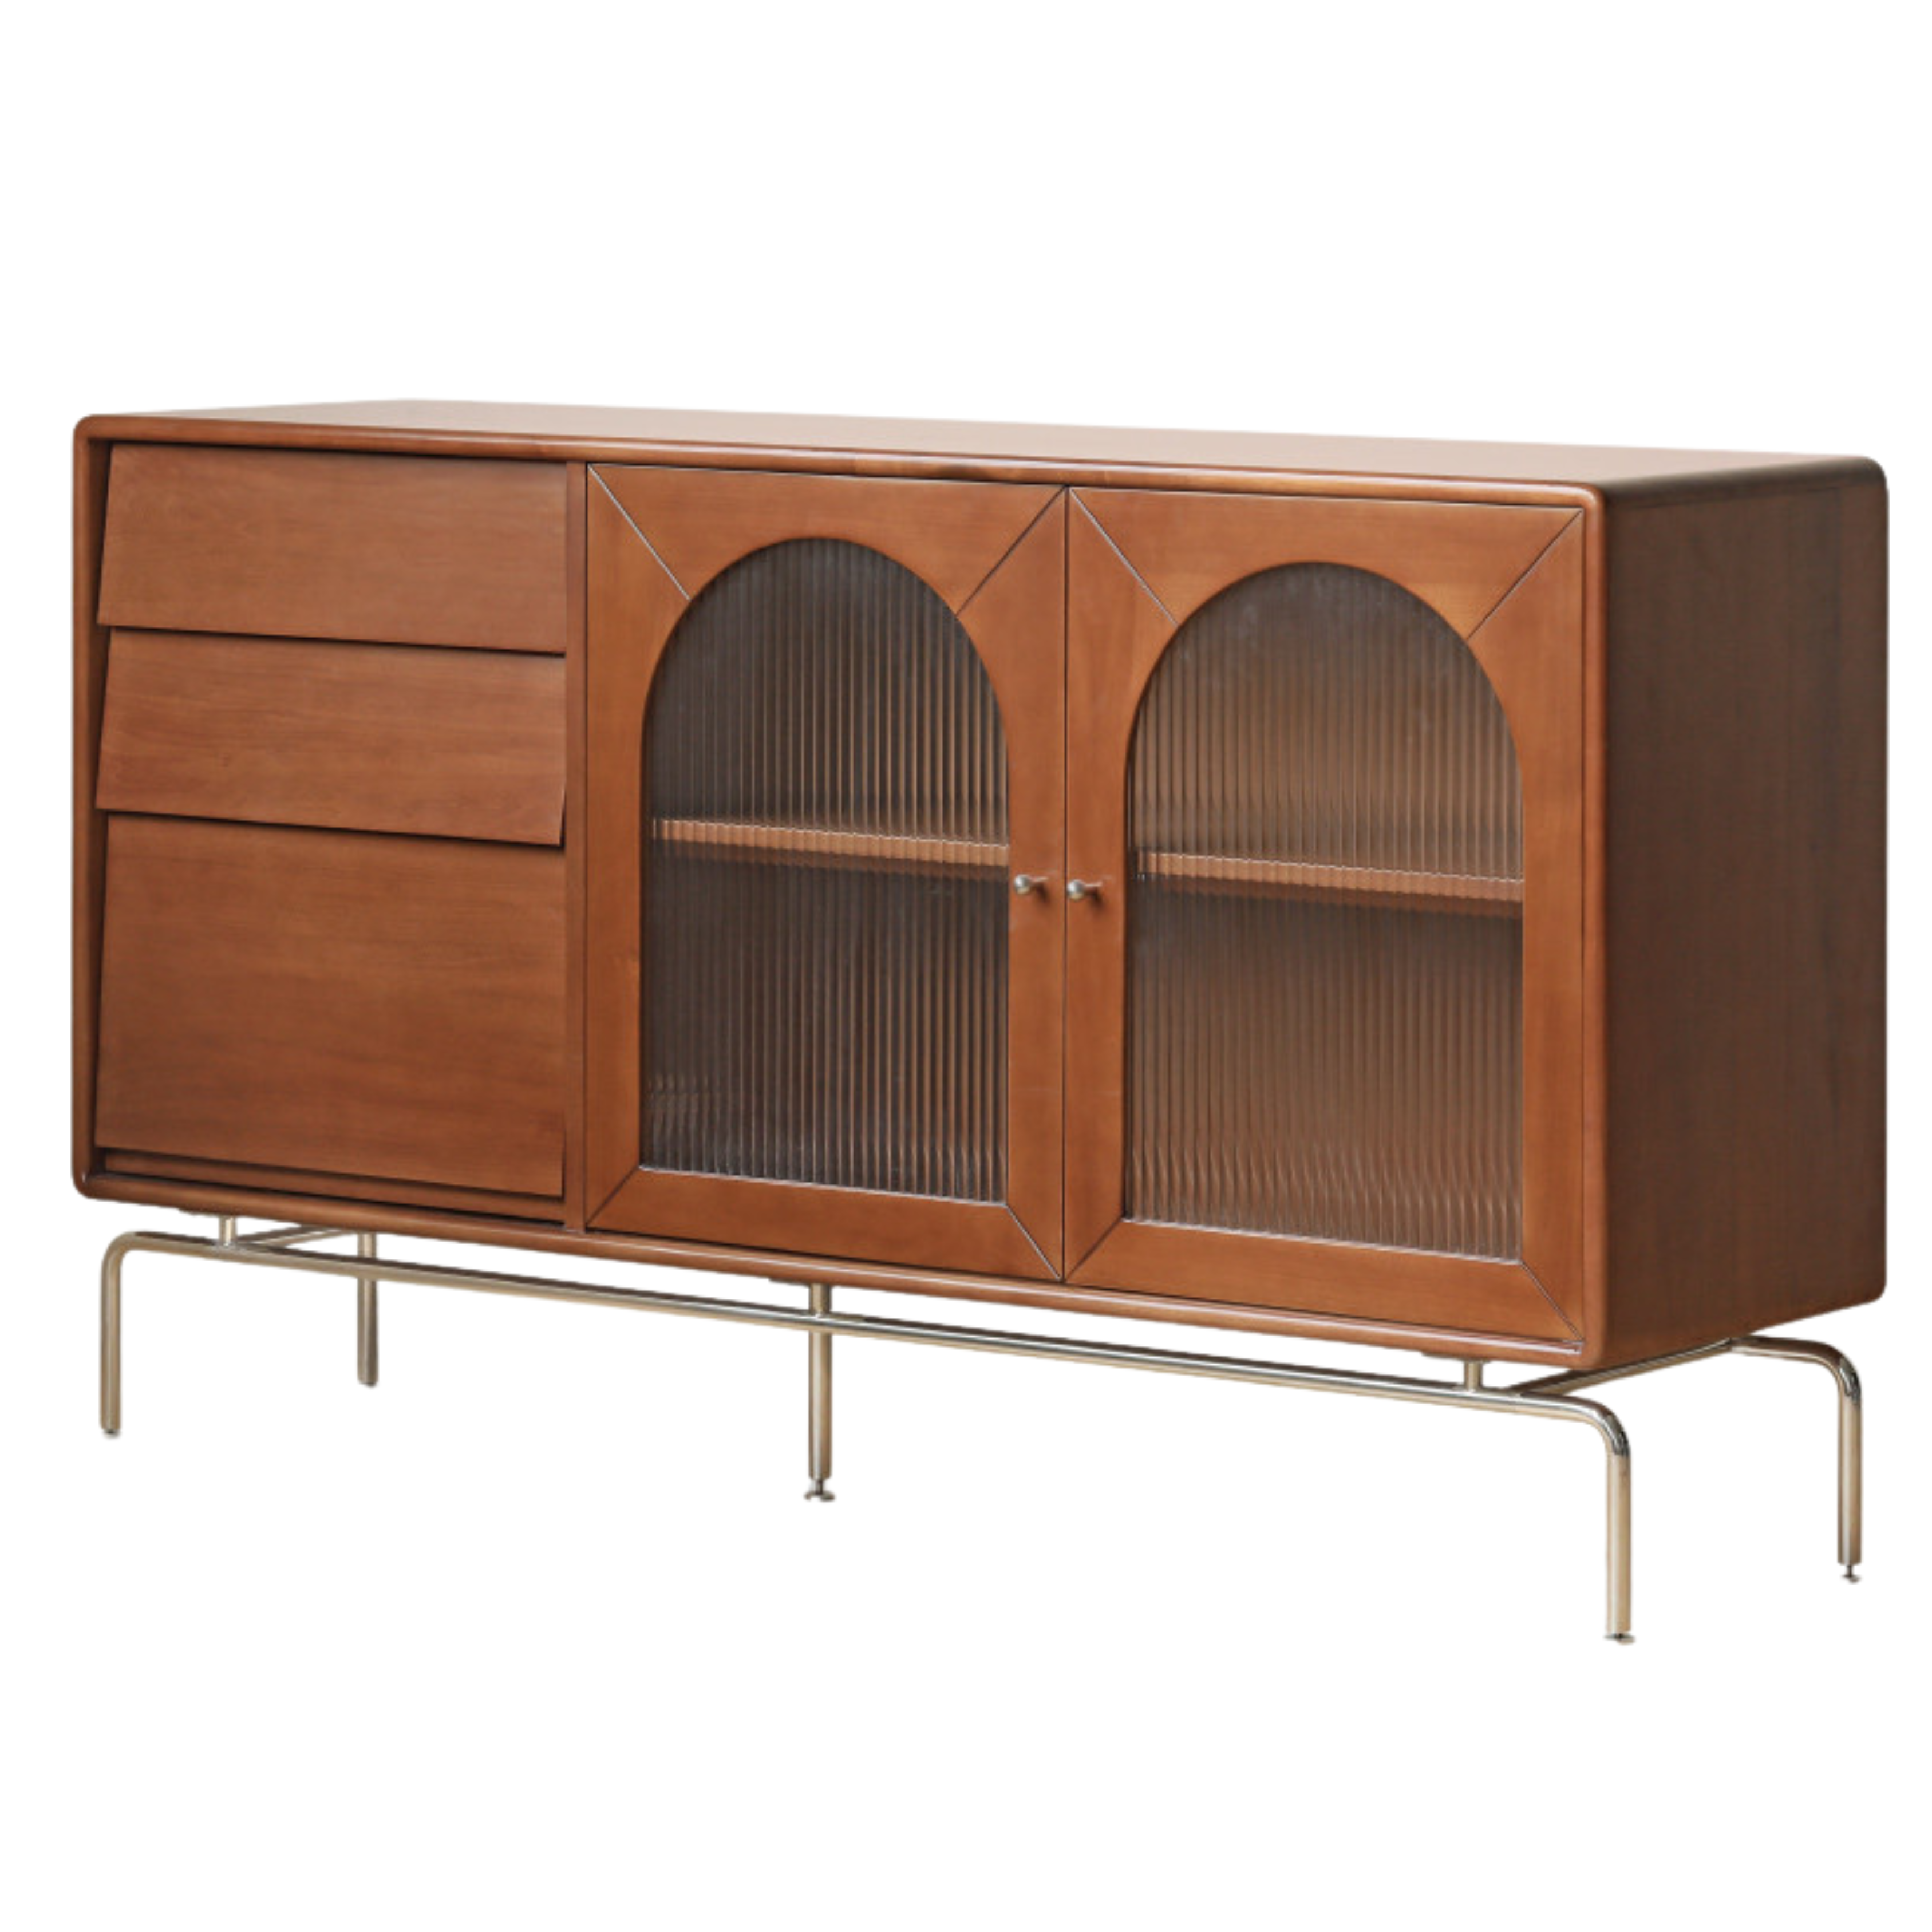 Sideboard French retro Cherry solid wood"